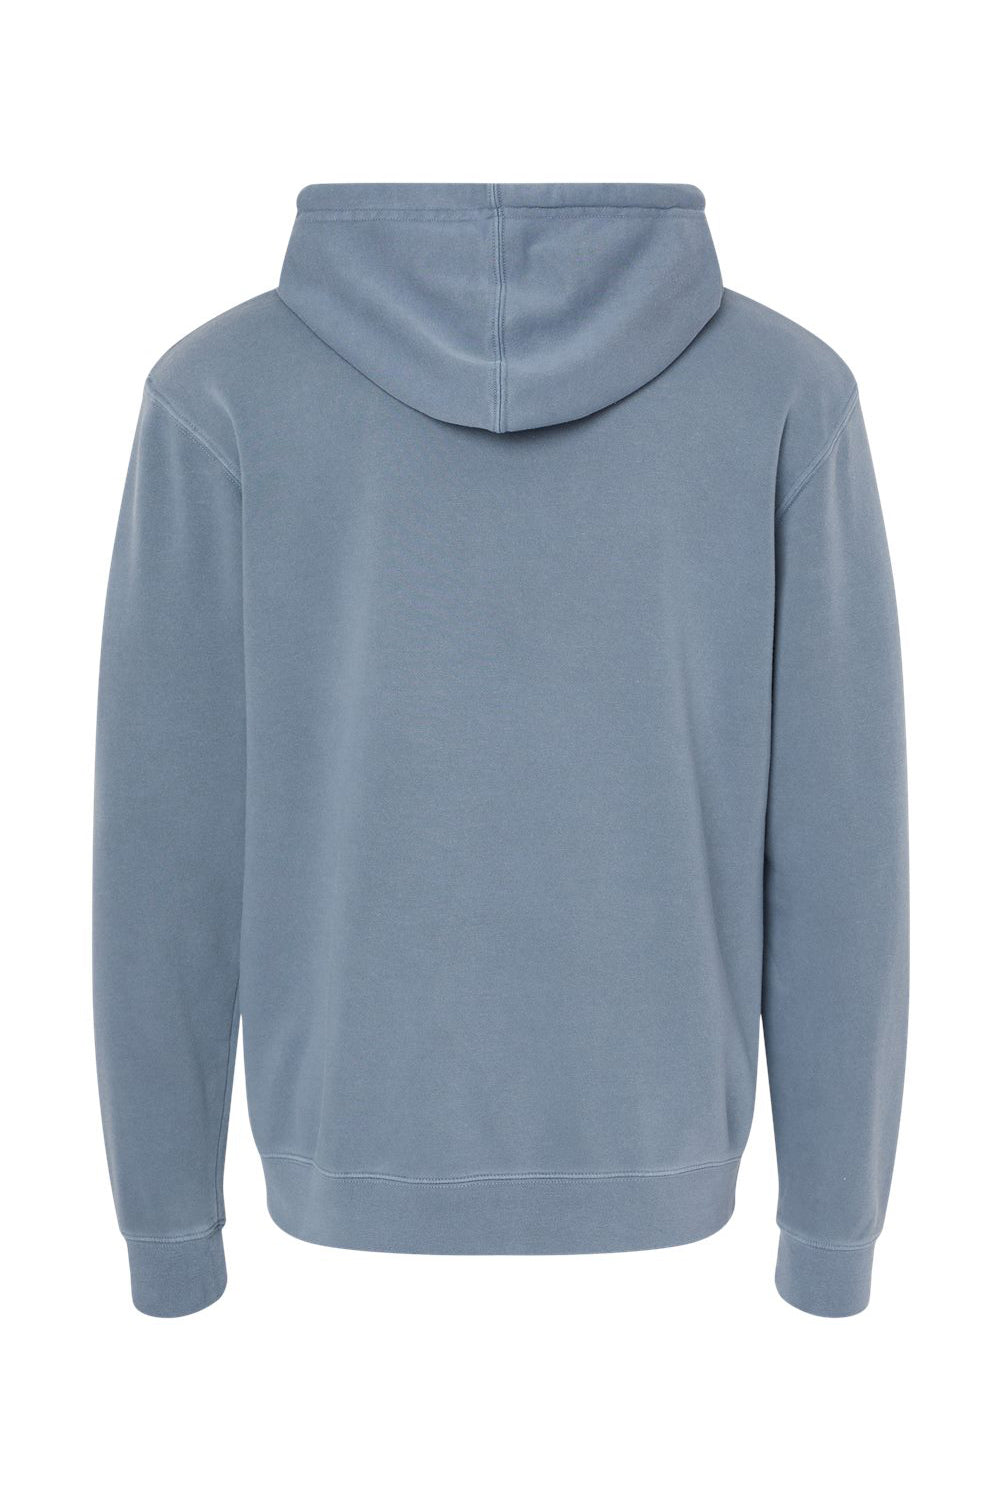 Independent Trading Co. PRM4500 Mens Pigment Dyed Hooded Sweatshirt Hoodie Slate Blue Flat Back